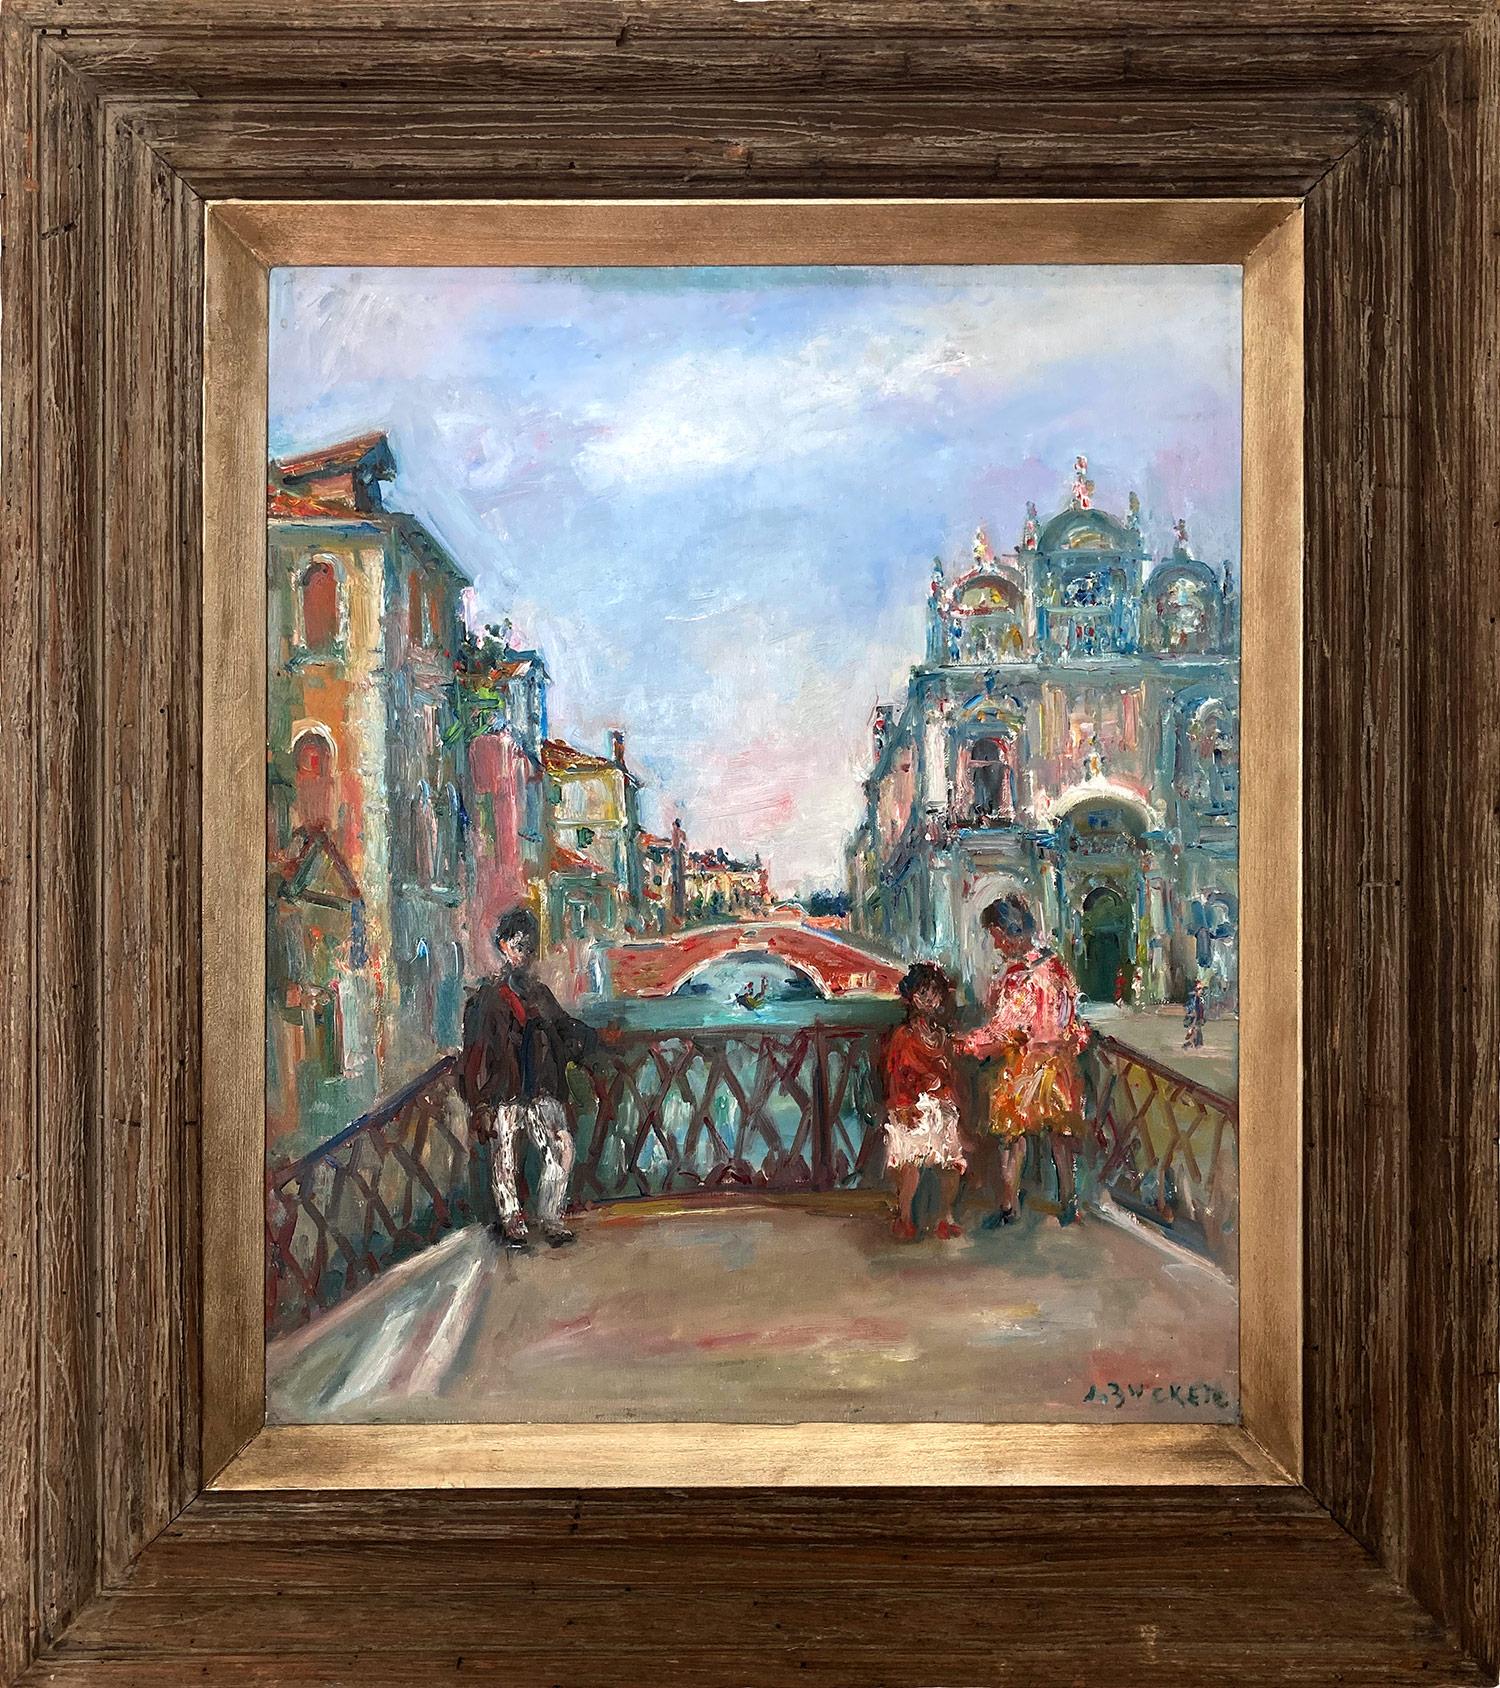 Jacques Zucker Landscape Painting - "View of Scuola Grande di San Marco" Post-Impressionist Oil Painting on Canvas